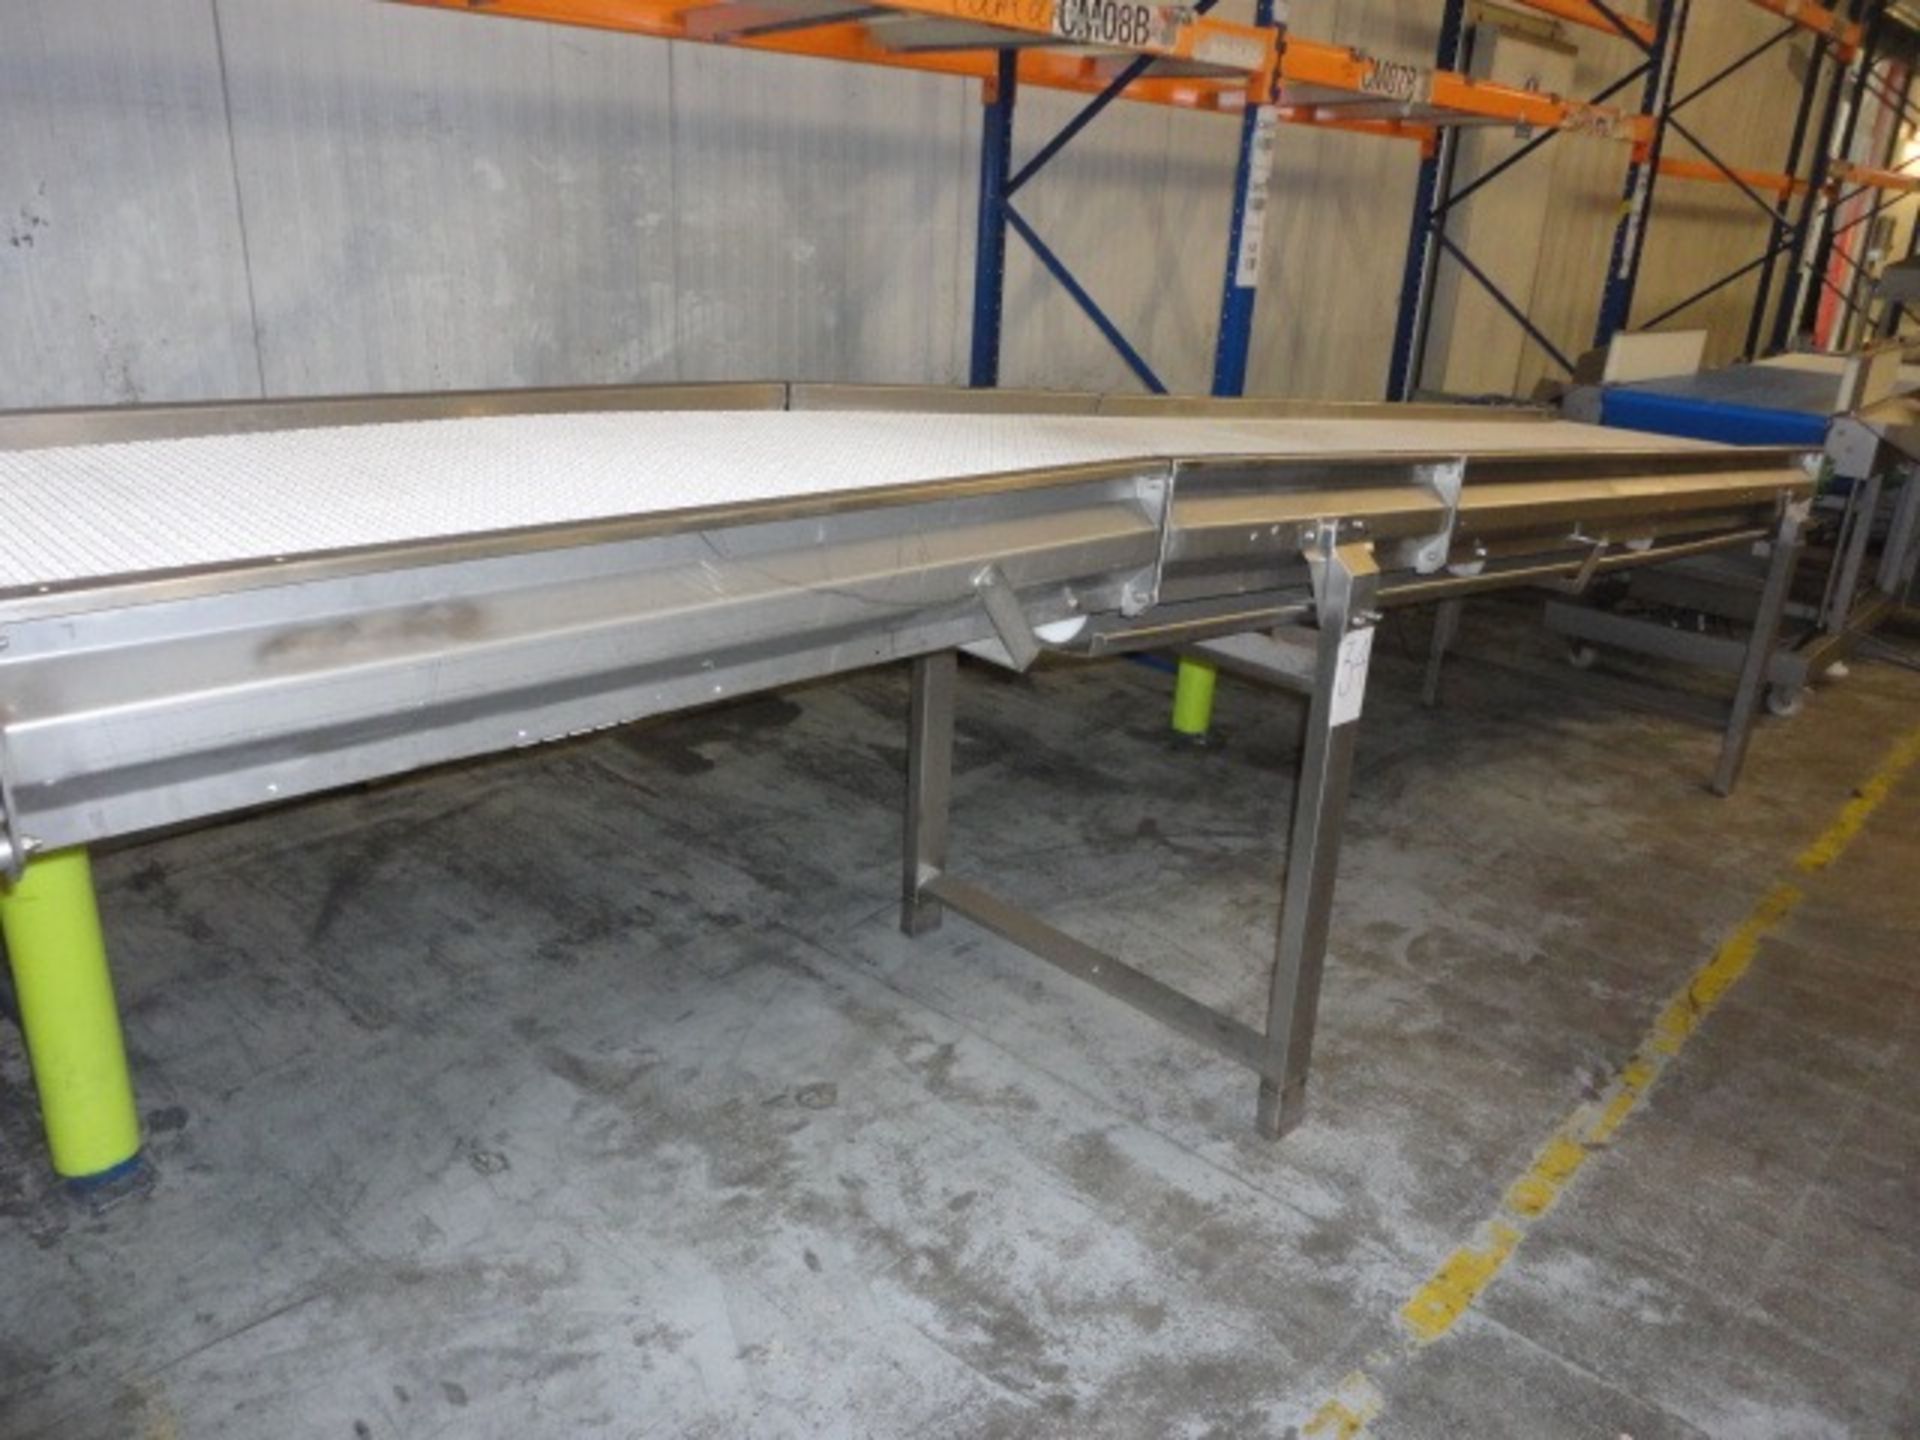 S/s Converyor with introlux belt 700mm wide x 4400mm long LIFT OUT £30 - Image 4 of 4